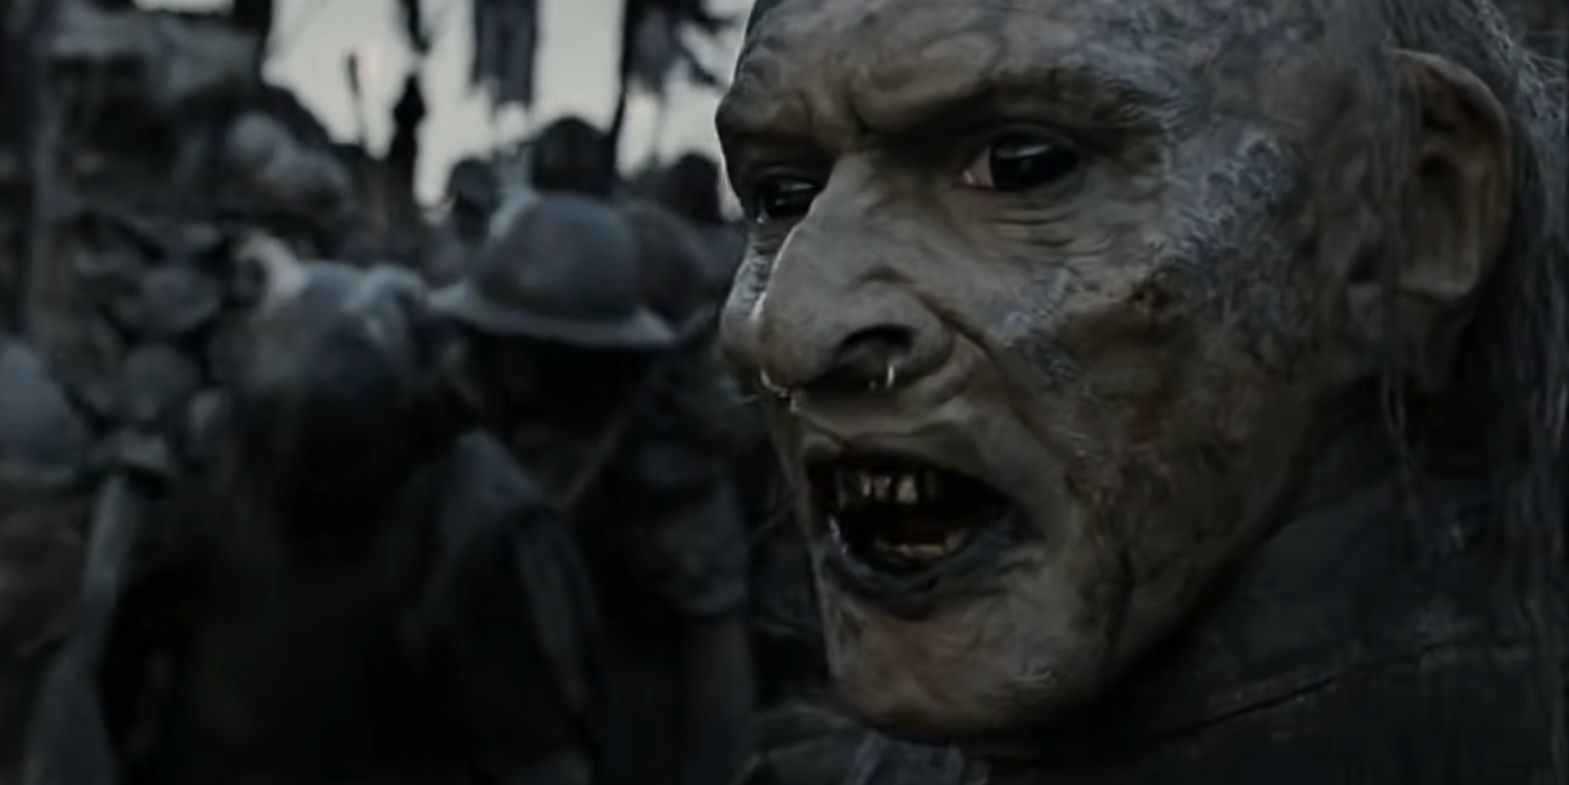 An Orc captain from Durthang in Mordor calls for inspection during Lord of the Rings Return of the King